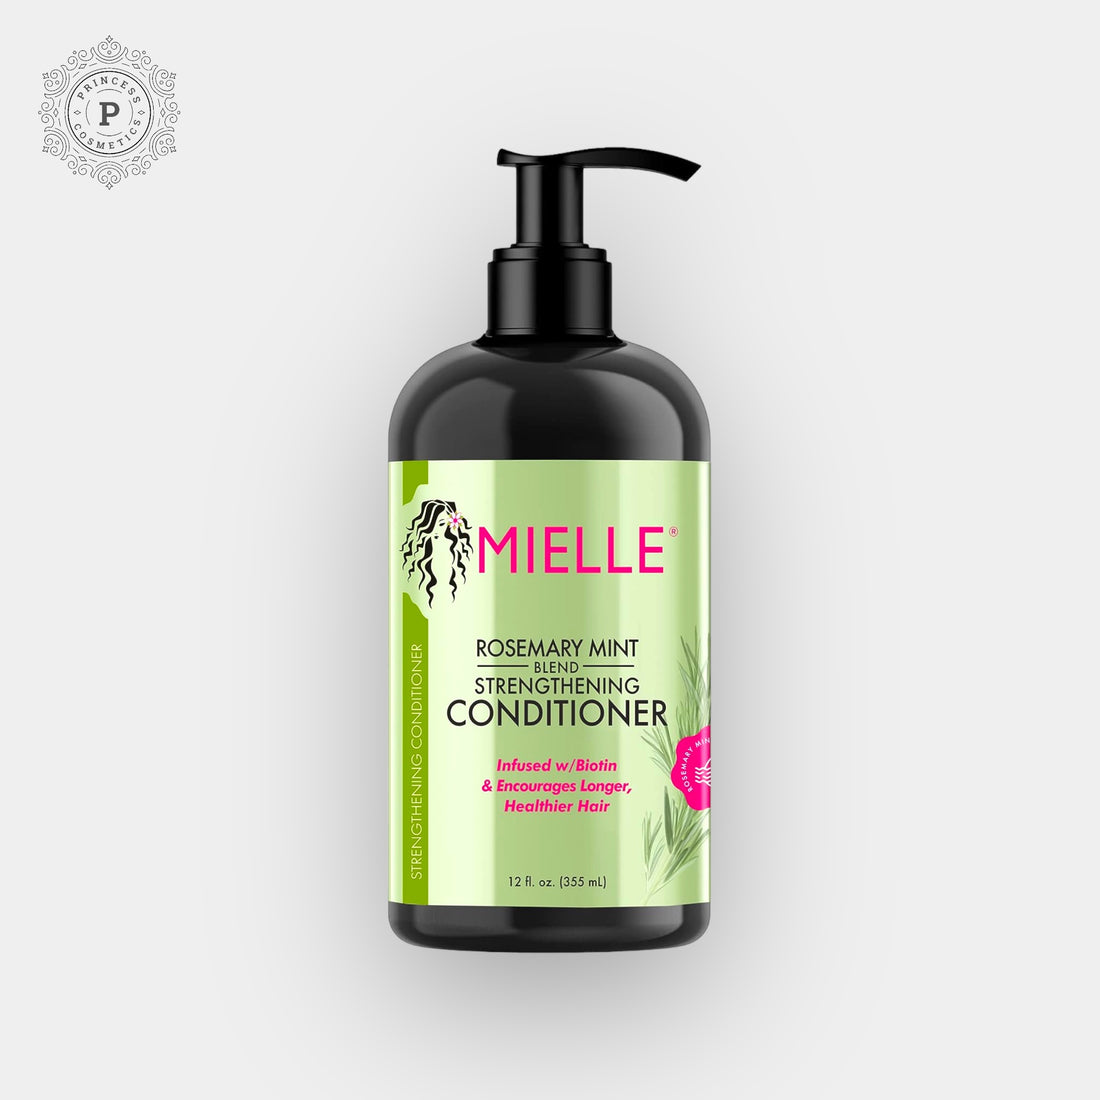 Mielle Organics Rosemary Mint Blend Strengthening Conditioner 355ml